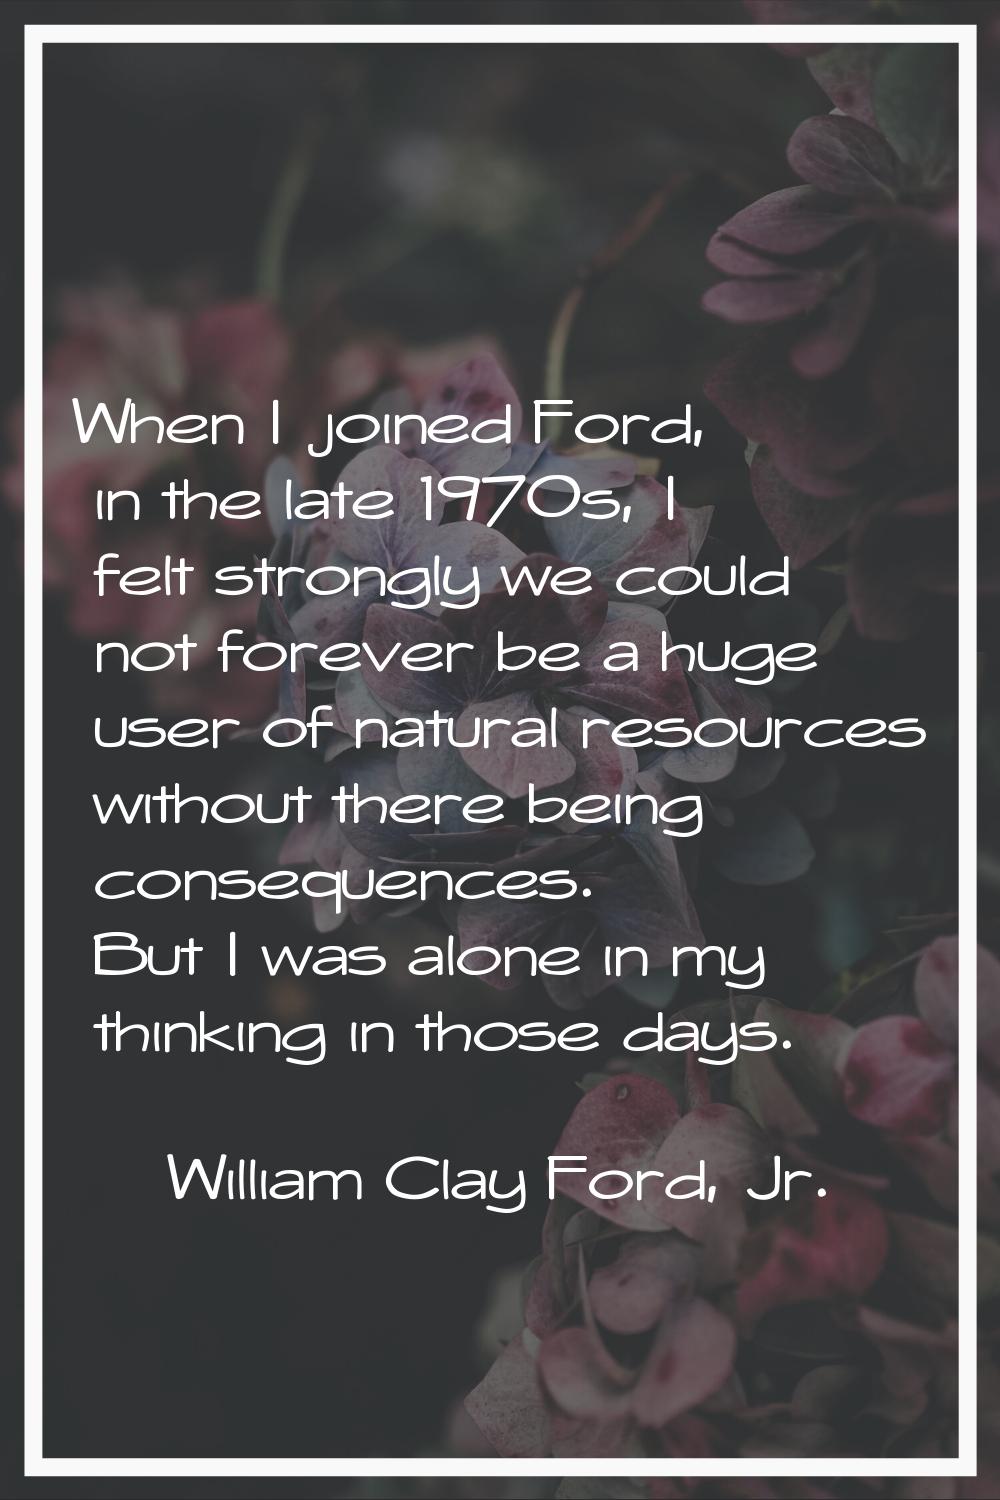 When I joined Ford, in the late 1970s, I felt strongly we could not forever be a huge user of natur